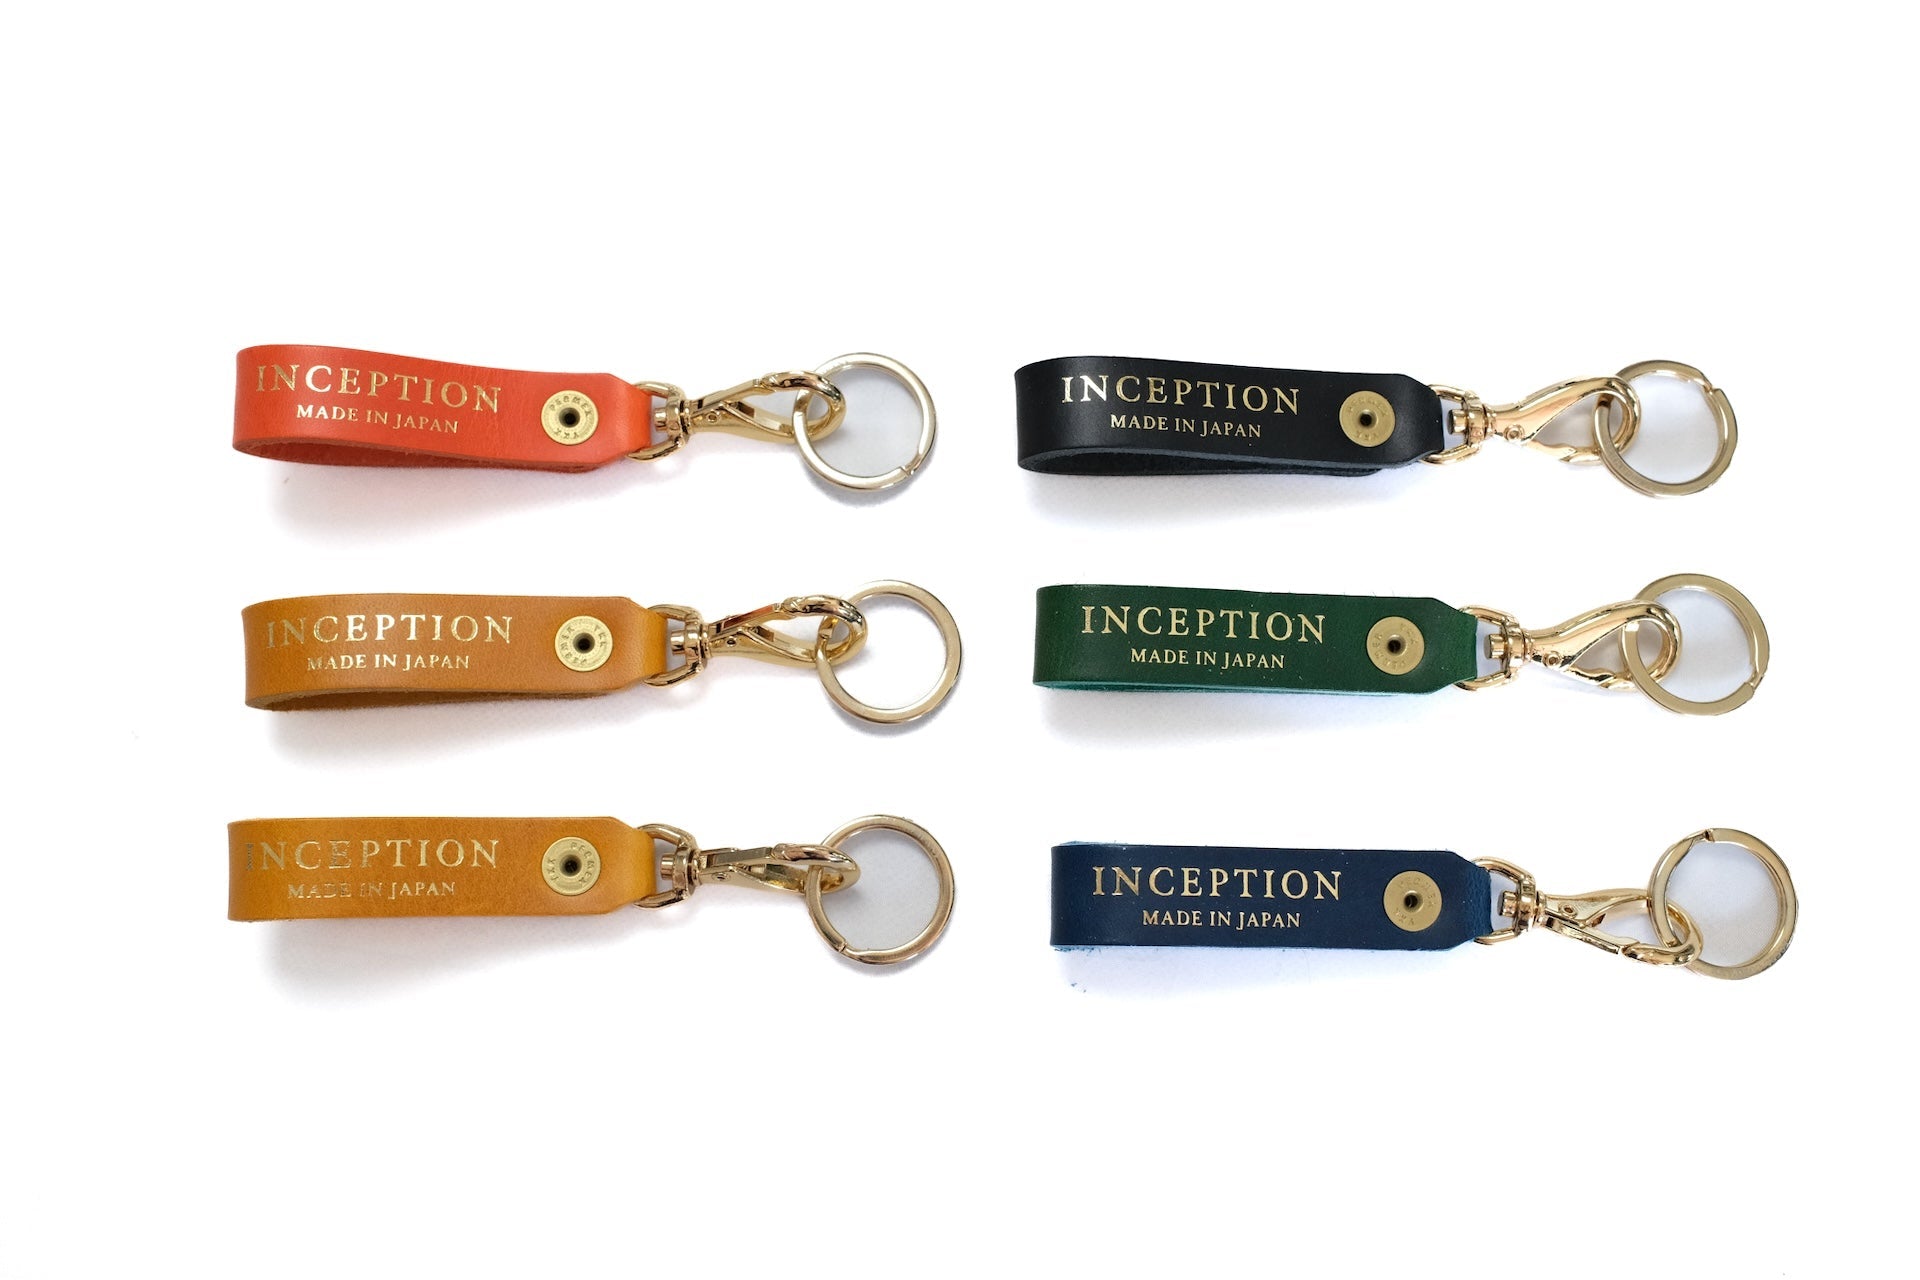 Inception by Accel Company 'Full-Grain Cowhide' Key Holders (Limited Edition)